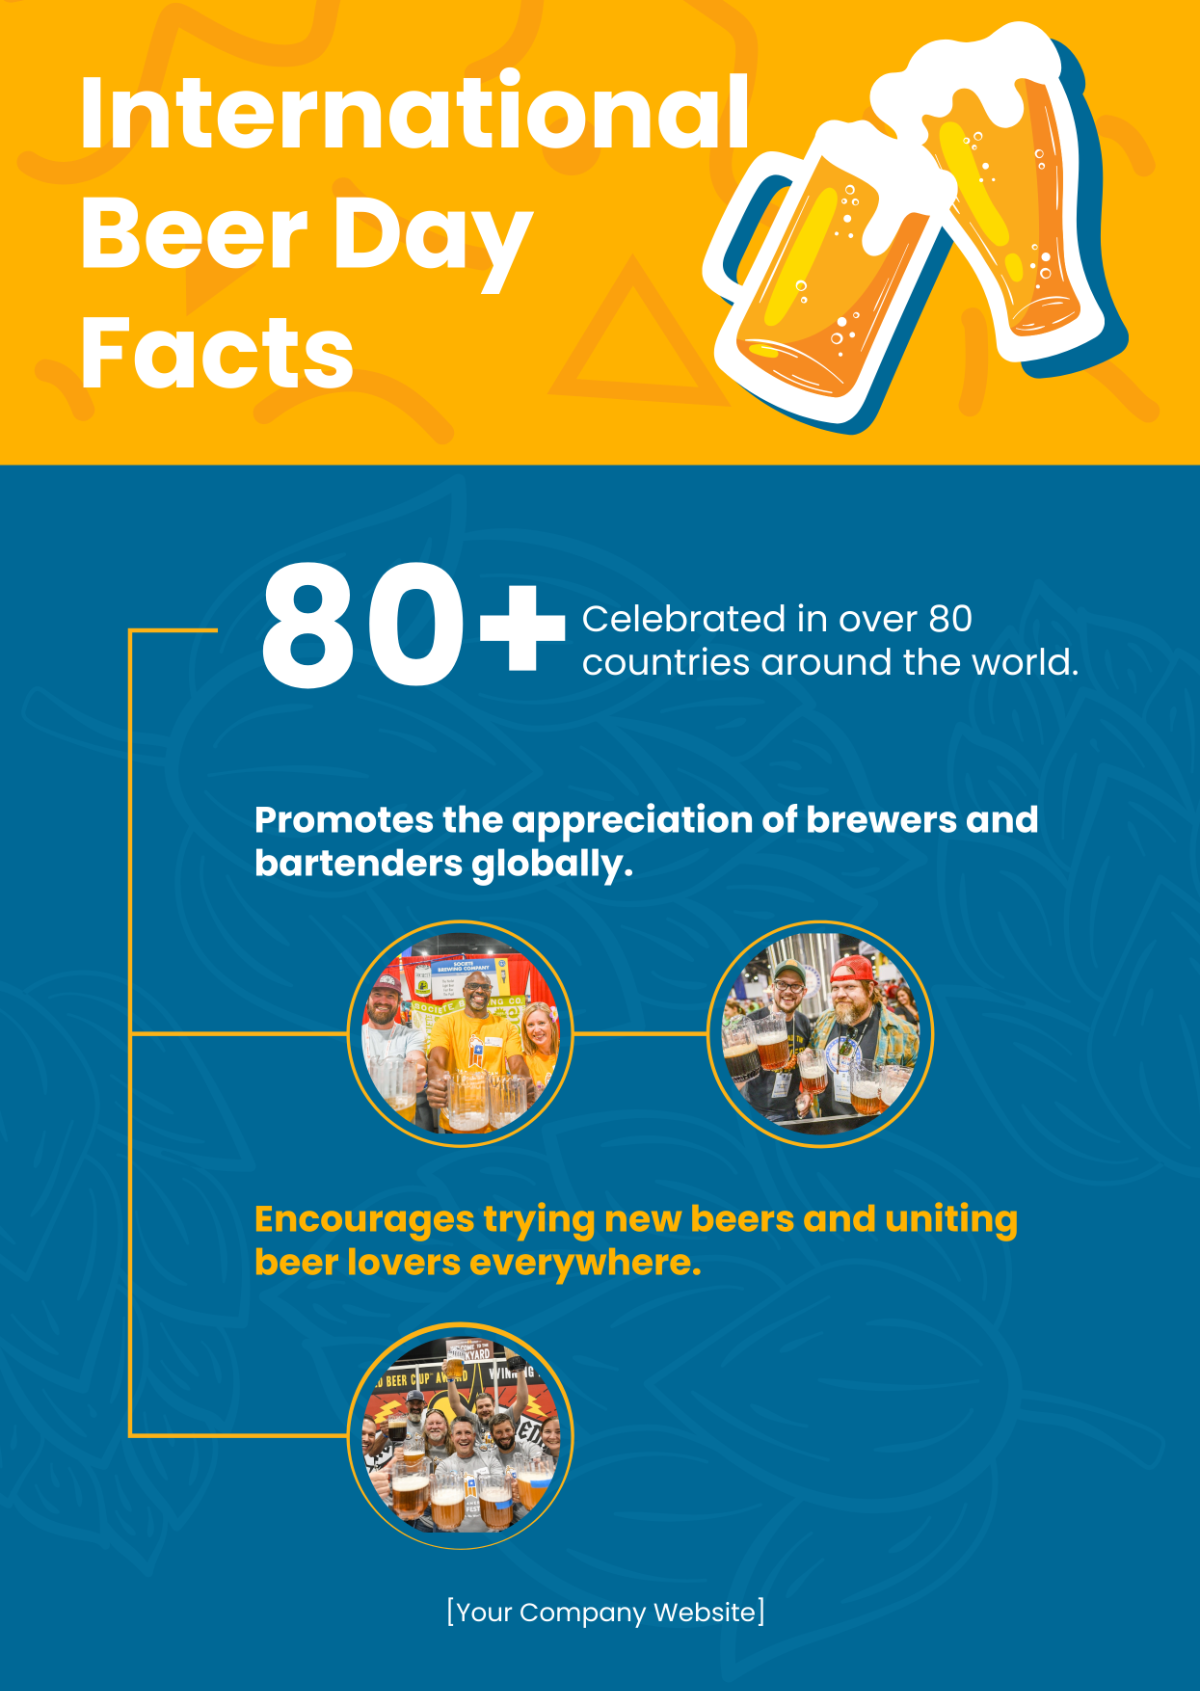 International Beer Day Facts